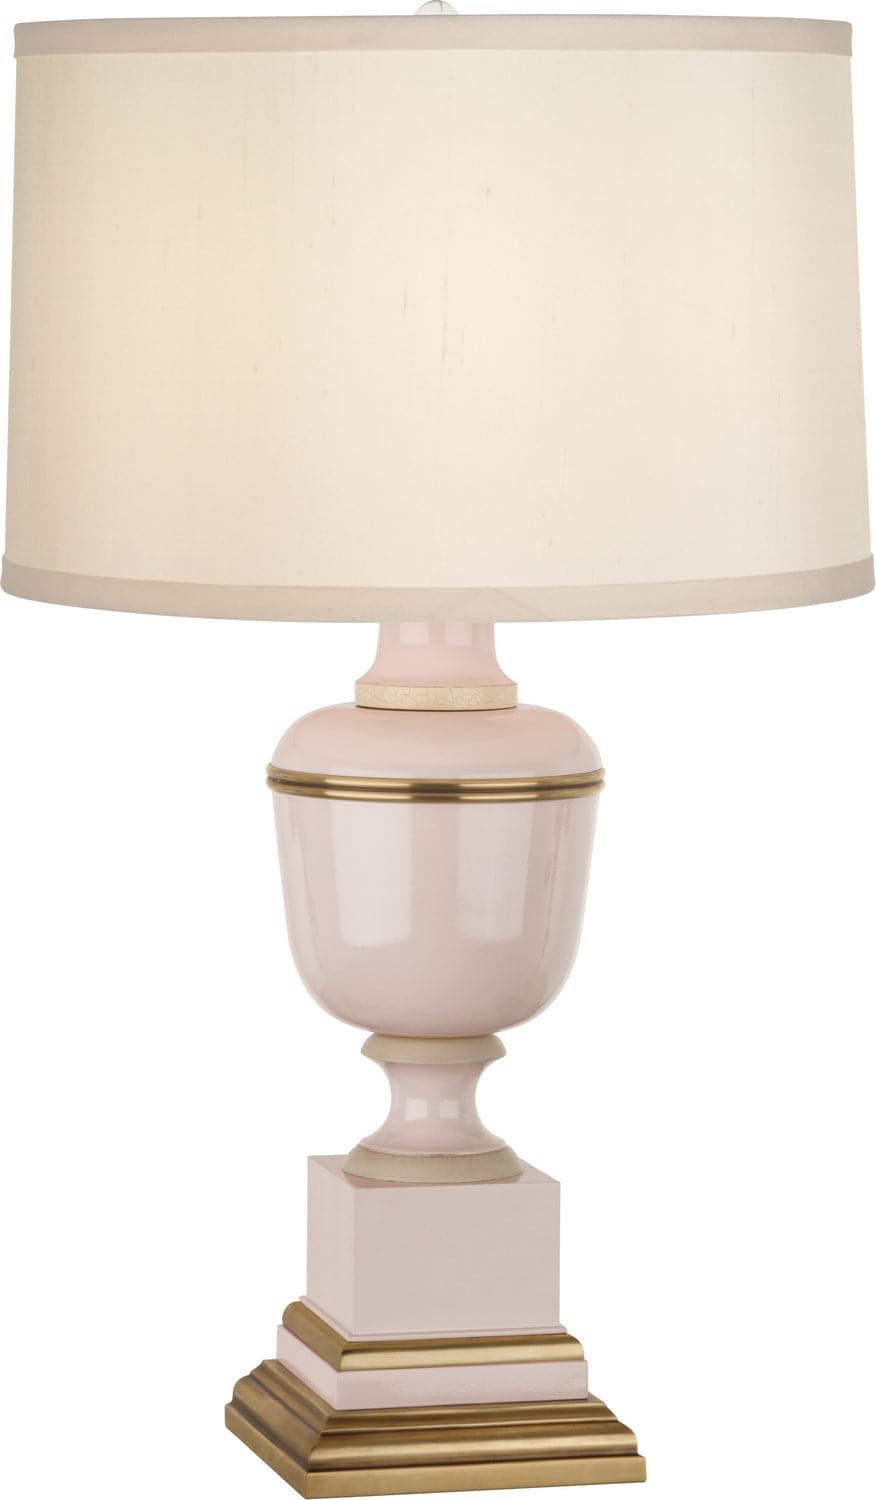 Robert Abbey - 2605X - One Light Accent Lamp - Annika - Blush Lacquered Paint w/Natural Brass and Ivory Crackle